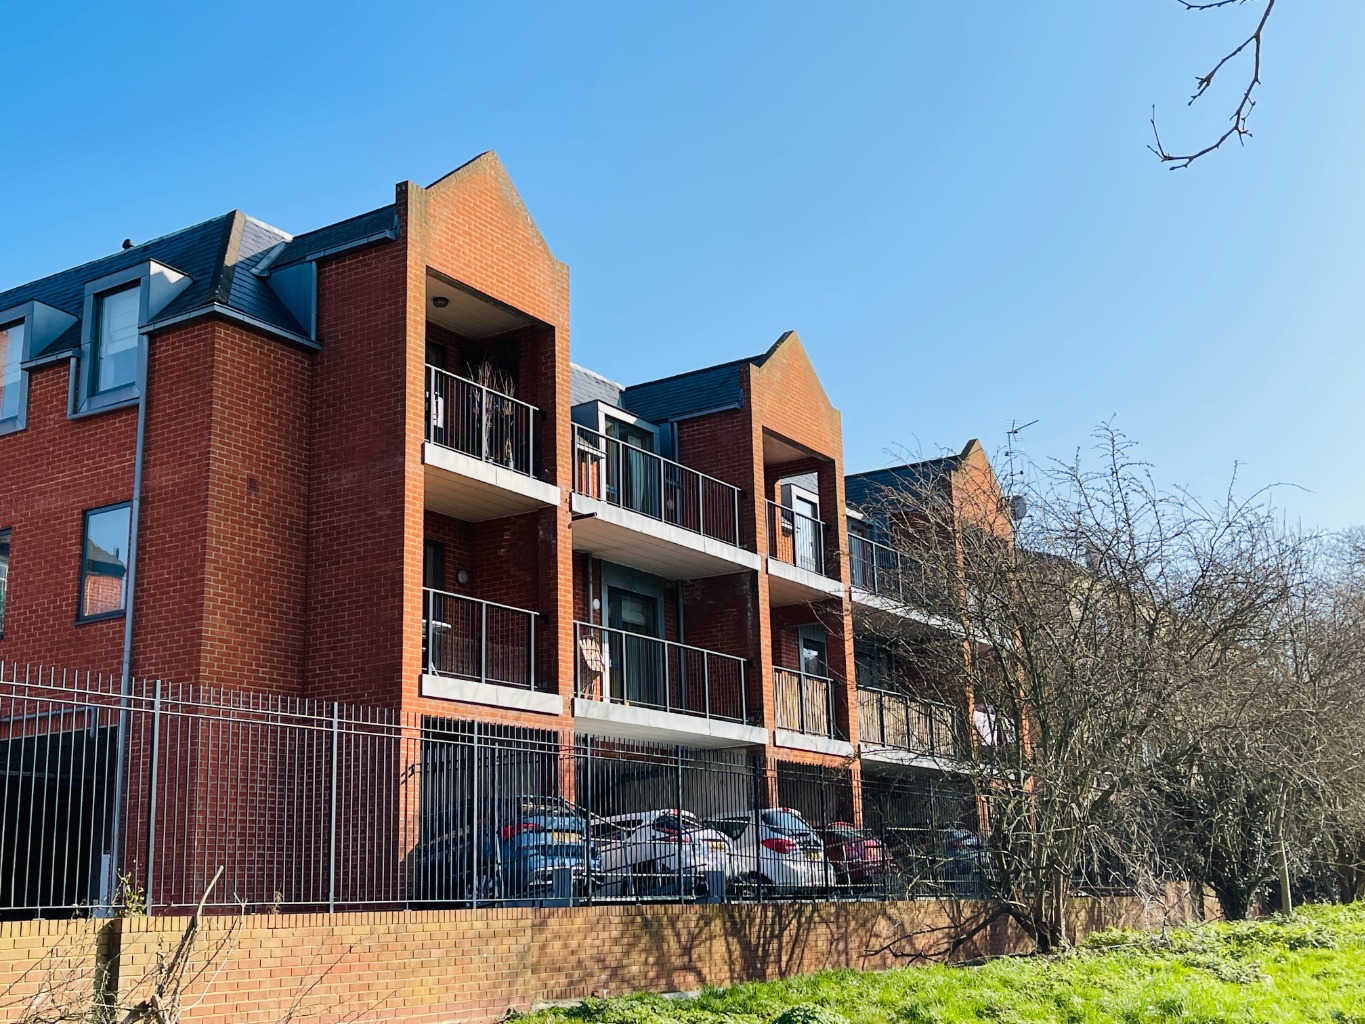 Beaumont Gibbs are offering for sale this lovely two double bedroomed first floor purpose built flat for sale in a gated development. Situated on the Woolwich & Eltham borders, this property is offered in excellent decorative condition.